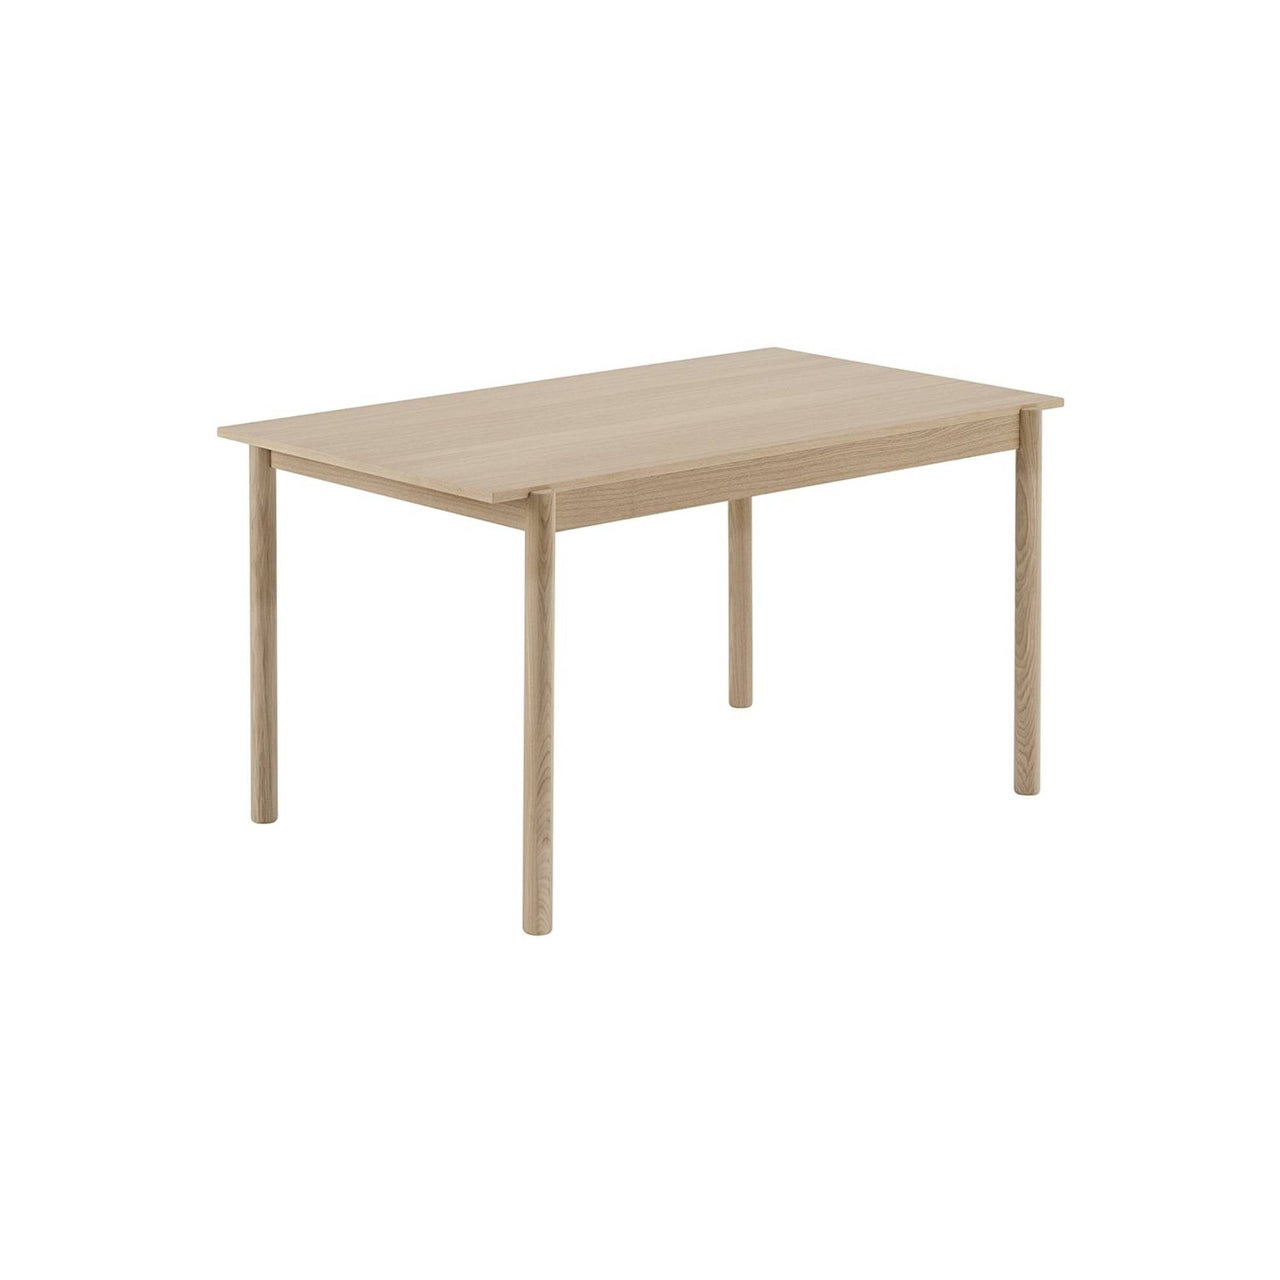 Linear Wood Table: Small - 55.1